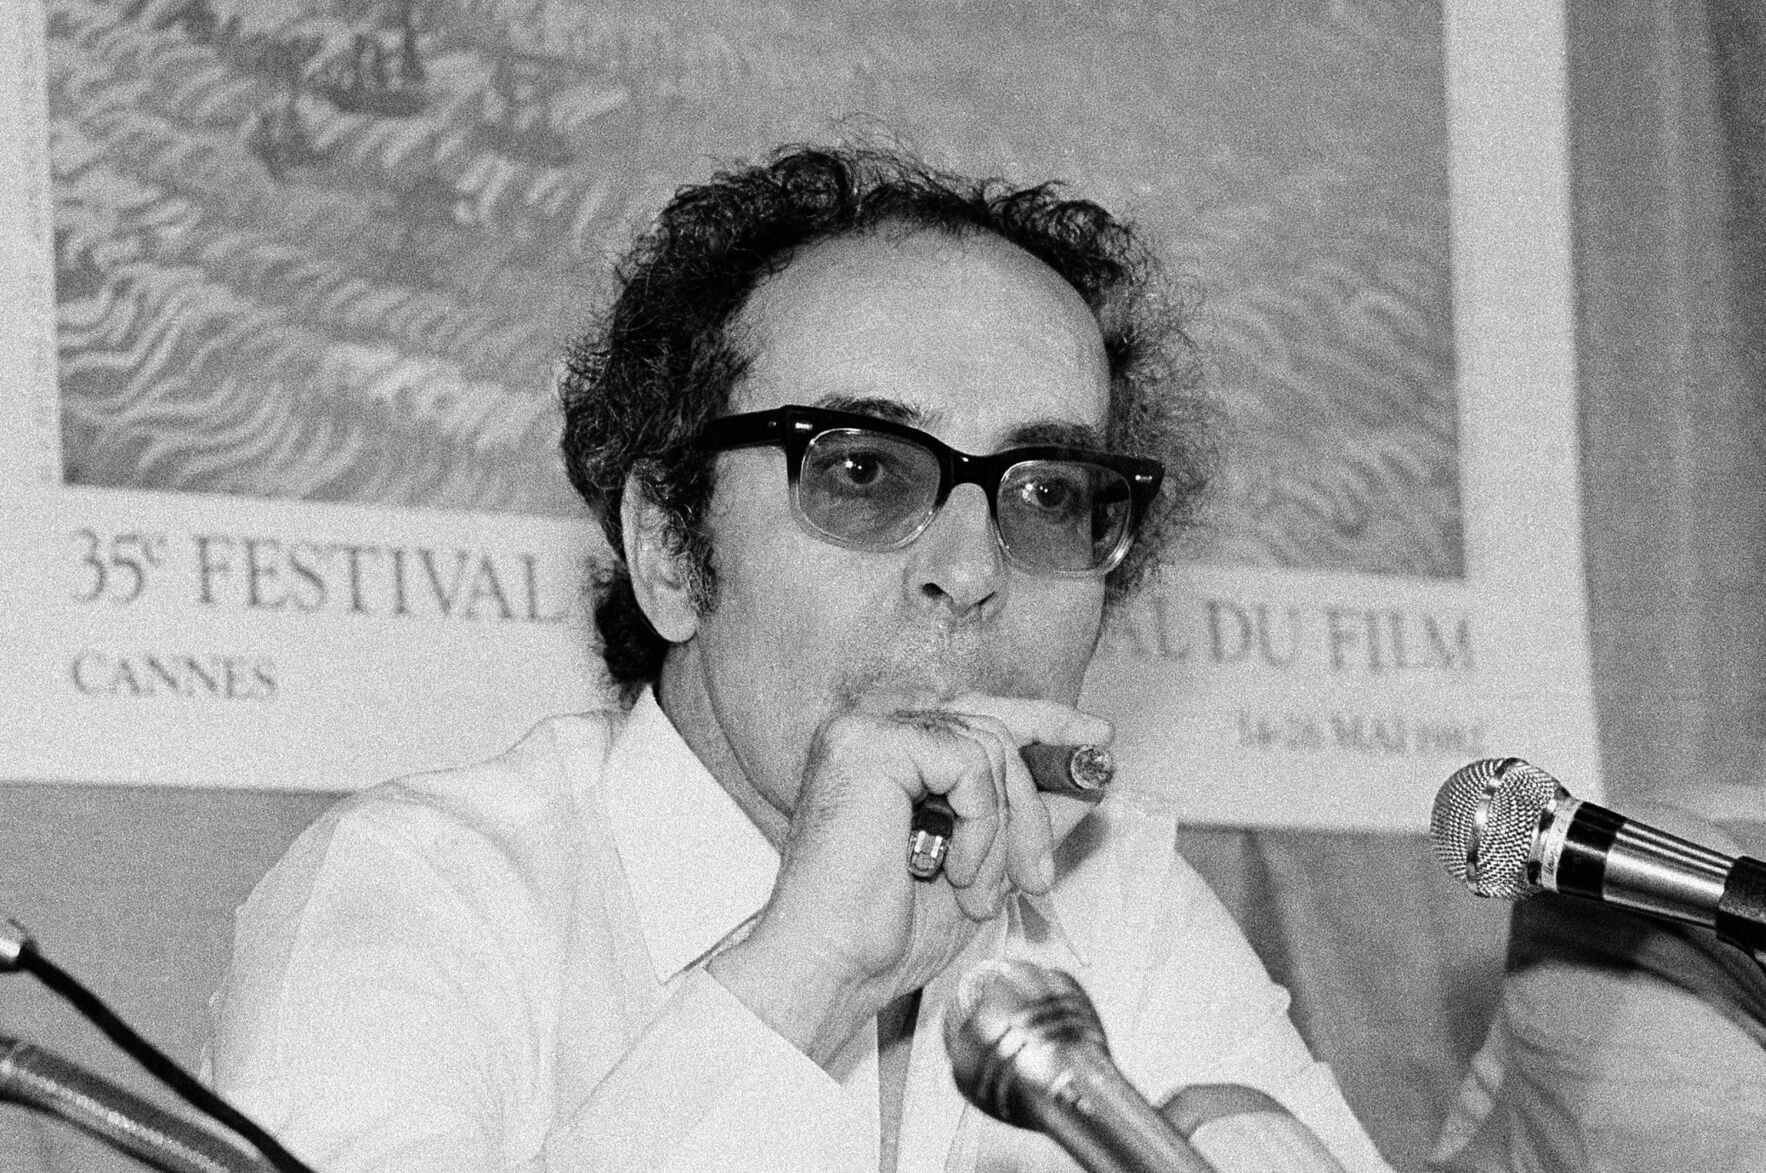 Iconic director Jean-Luc Godard dead at 91, French media report